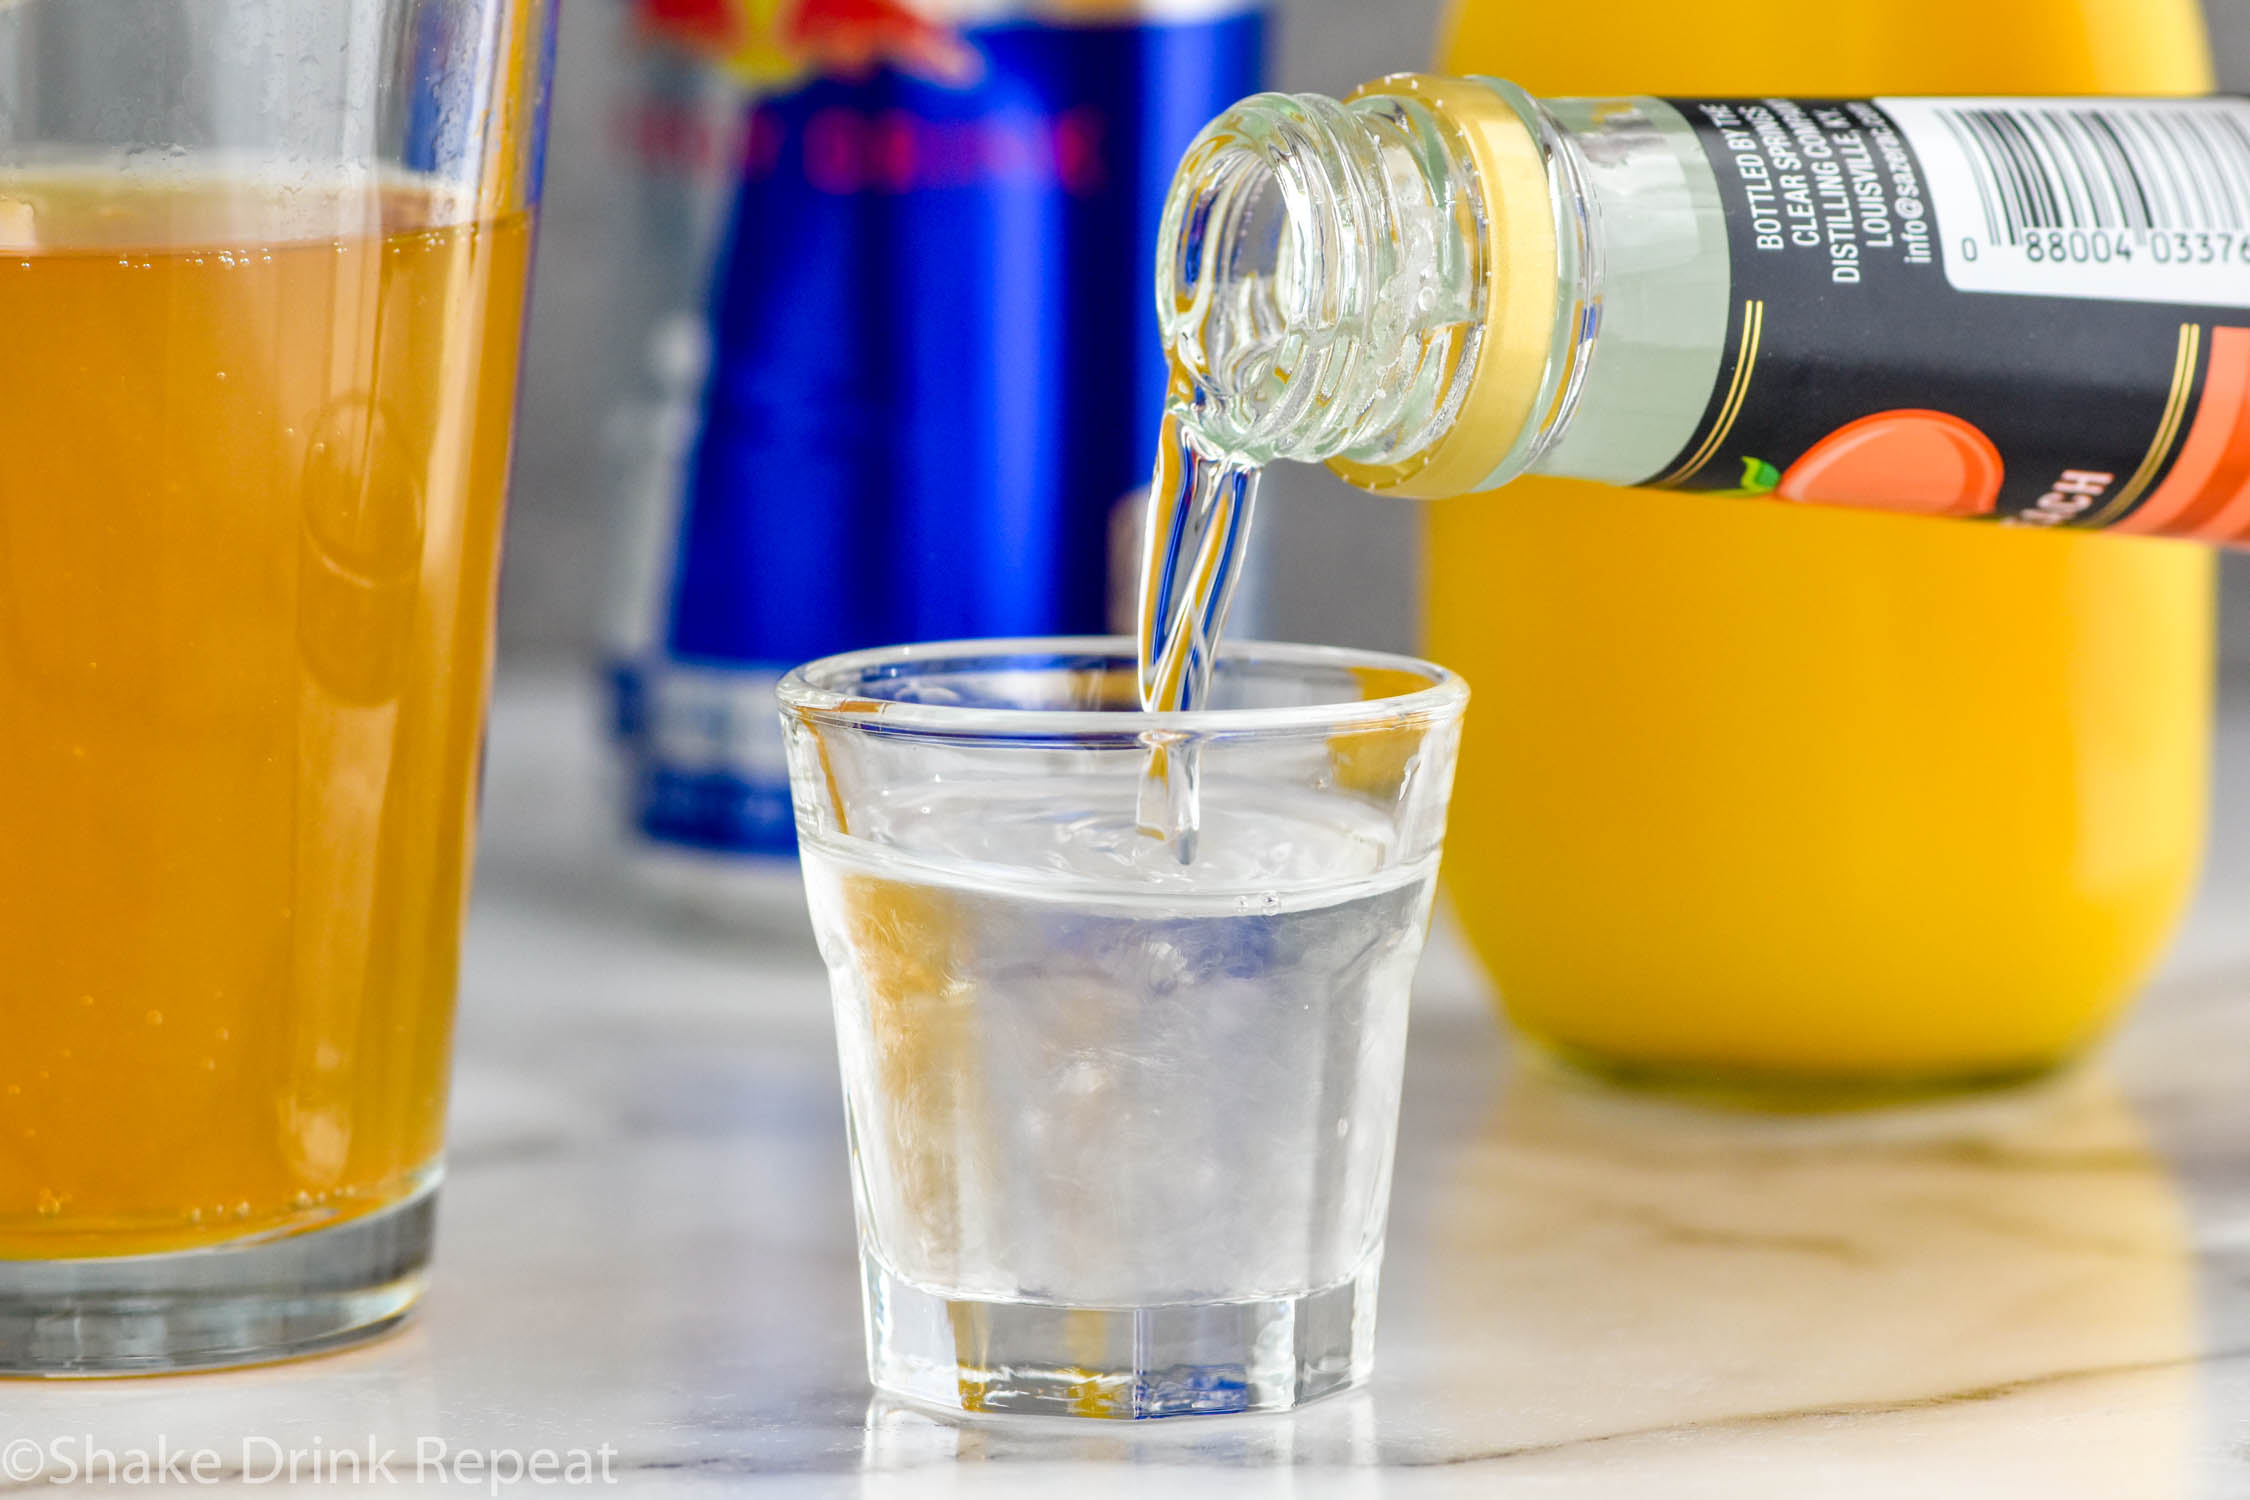 Side view of peach schnapps being poured into a shot glass for Cactus Cooler Shot recipe. Pint glass of Red Bull, can of Red Bull, and bottle of orange juice in the background.